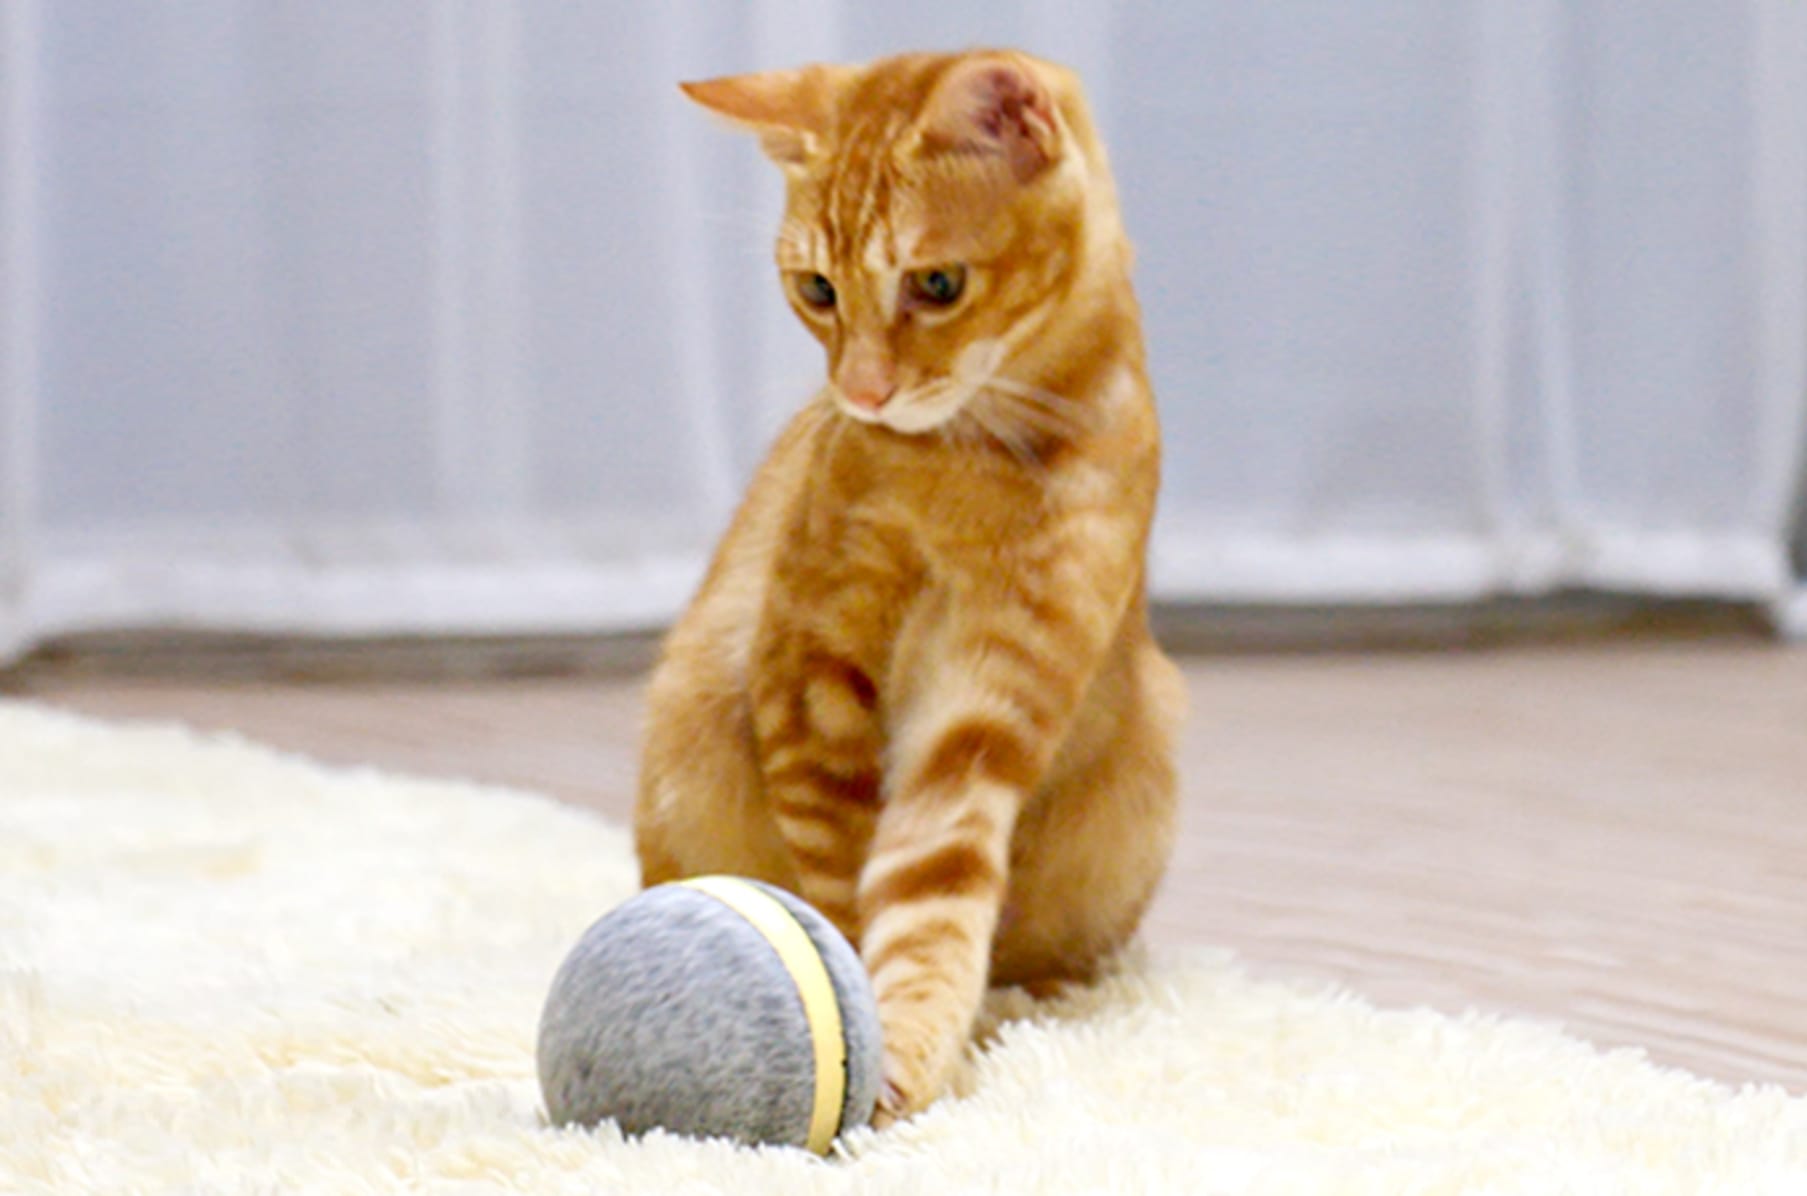 cat wicked ball